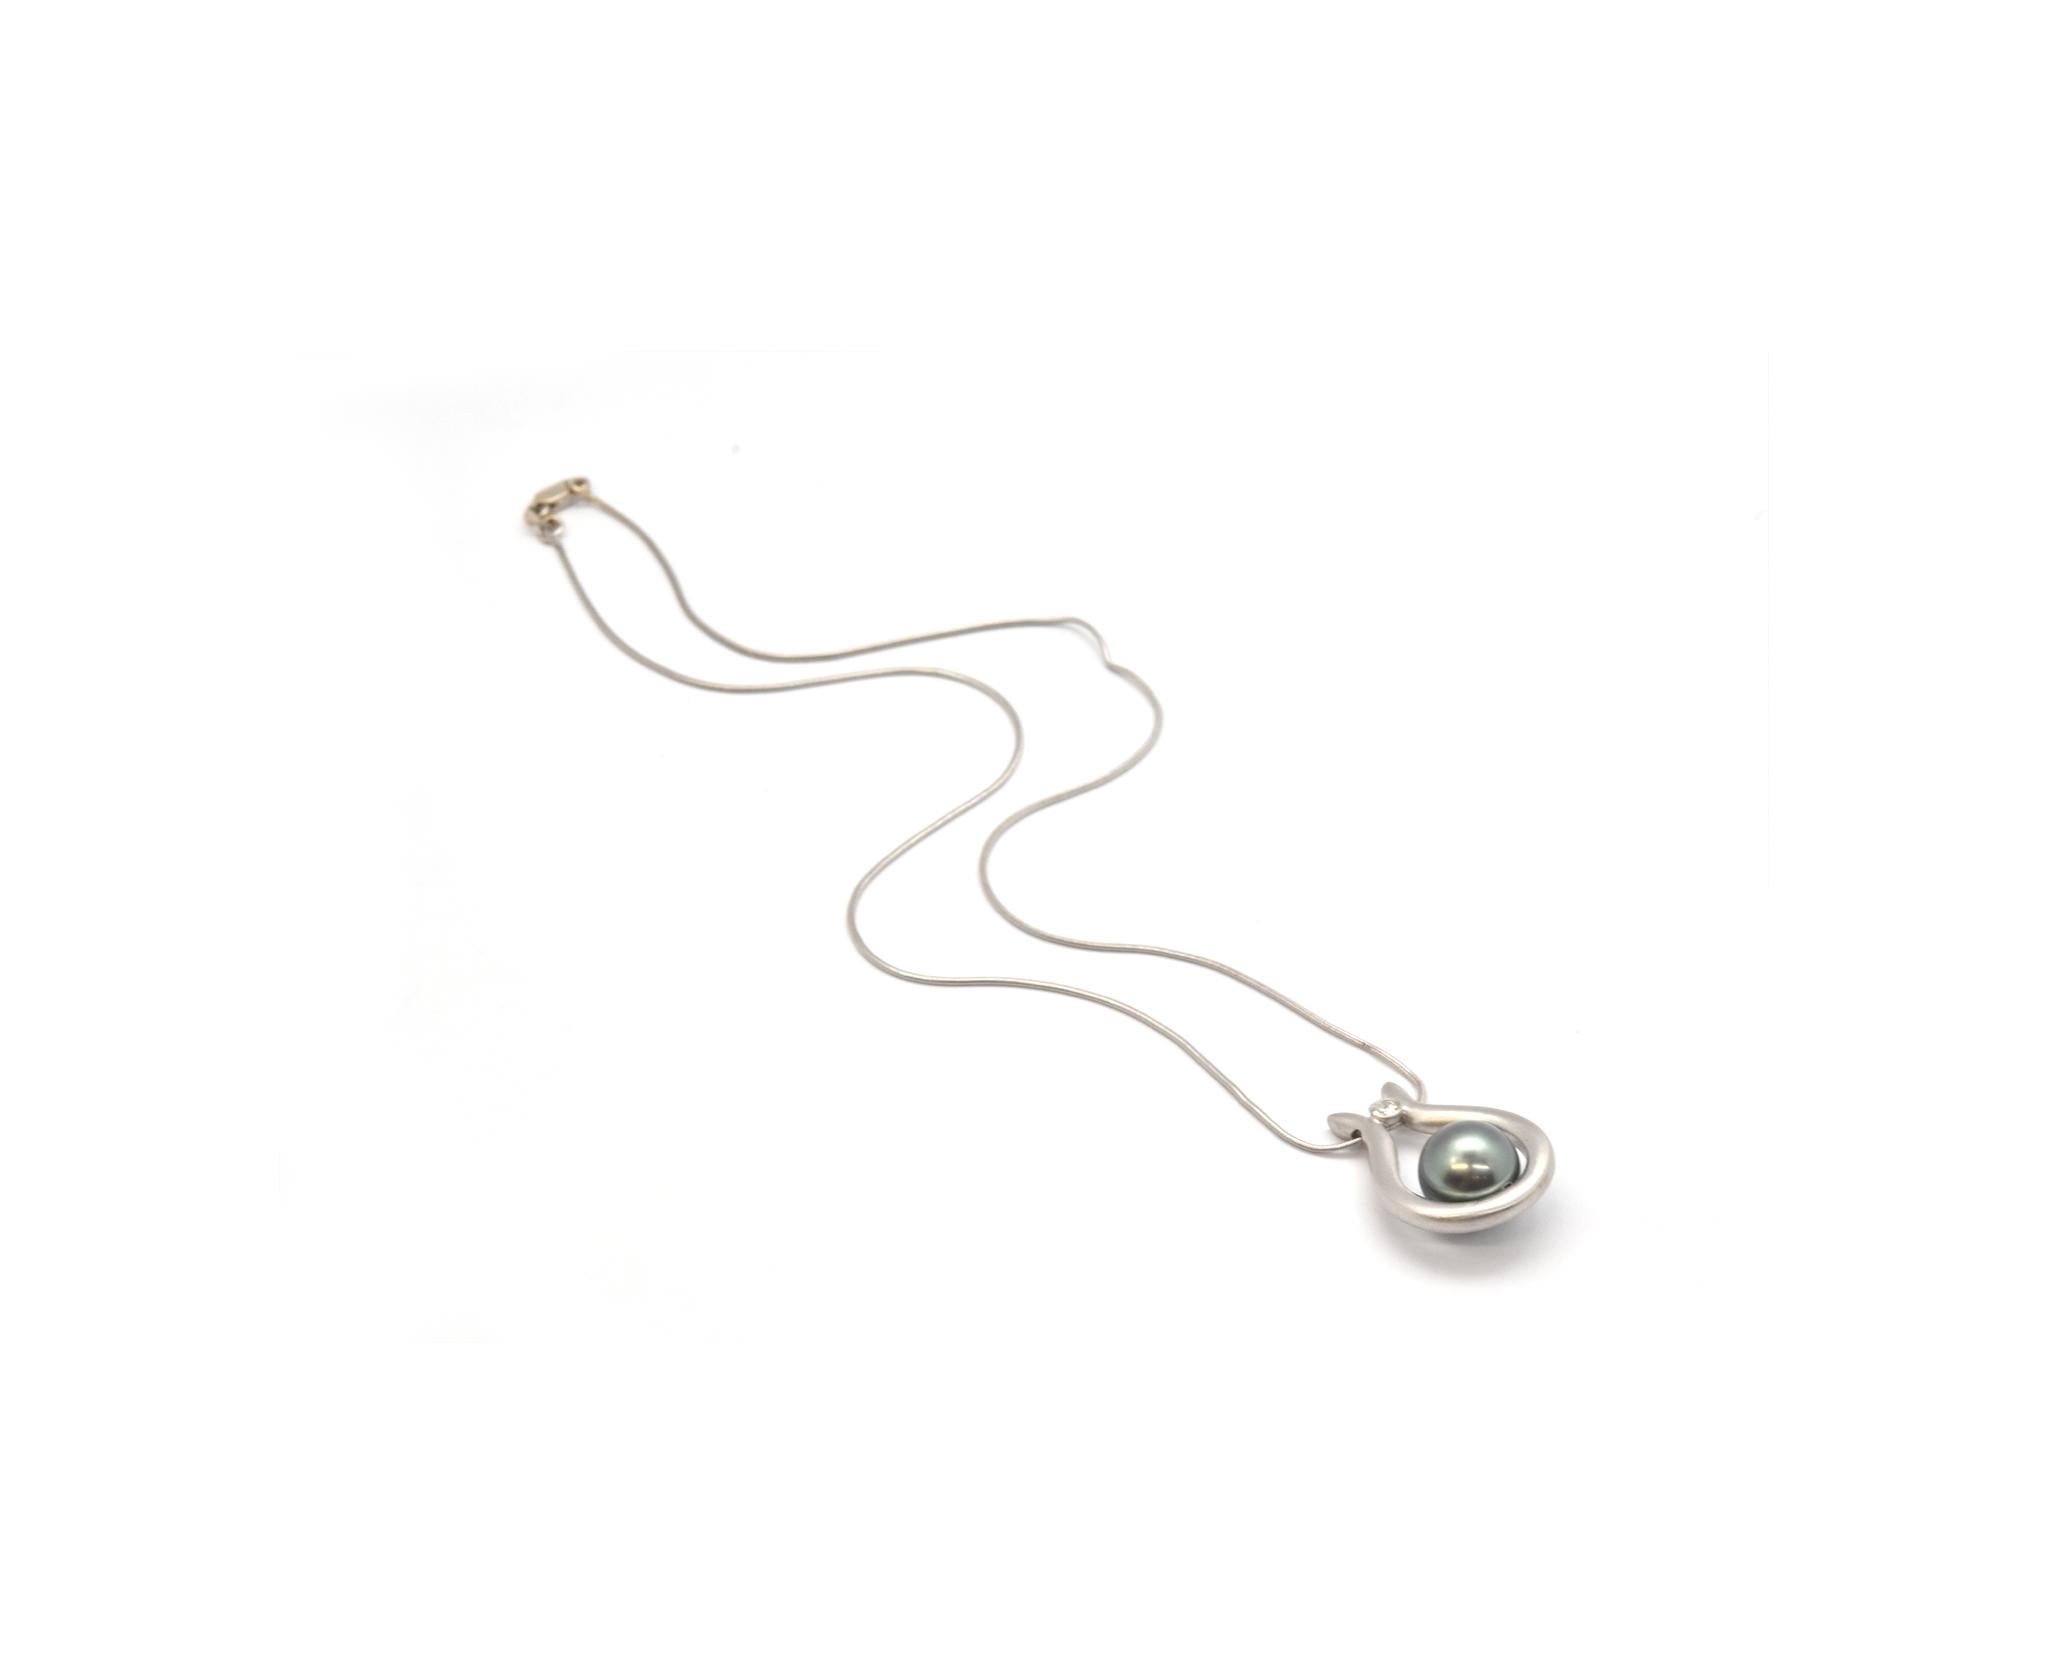 This necklace is made in 18k white gold. It features a Tahitian pearl measuring 10mm in diameter. The pearl is accented by a single diamond weighing 0.11ct. The pendant measures 18x25mm, and the necklace measures 16 inches. The necklace weighs 10.5